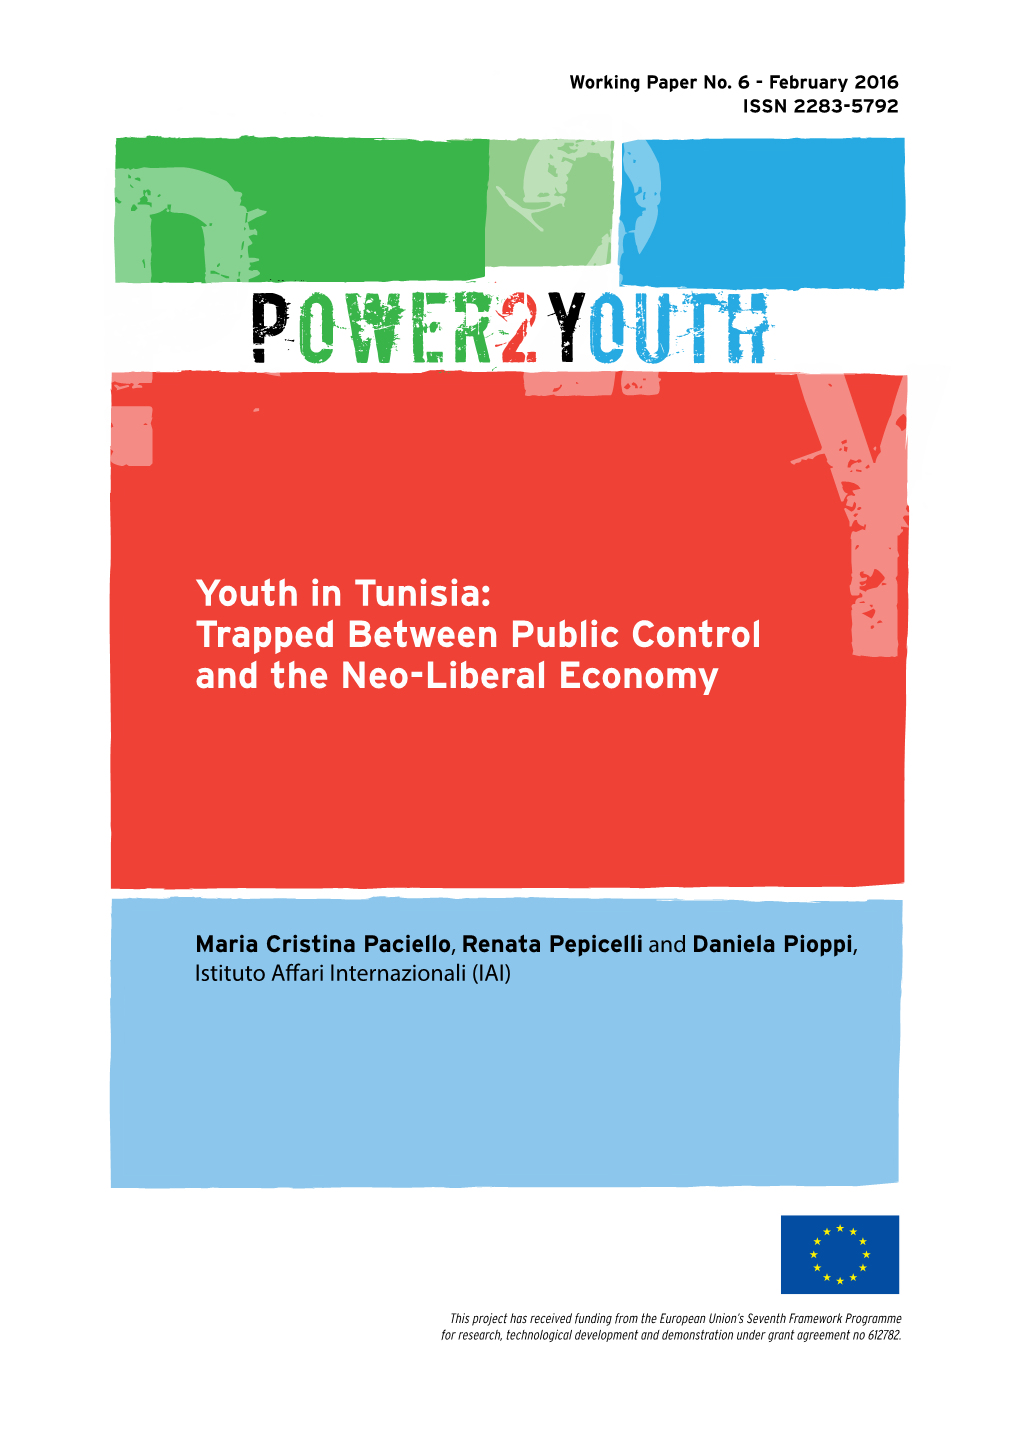 Youth in Tunisia: Trapped Between Public Control and the Neo-Liberal Economy